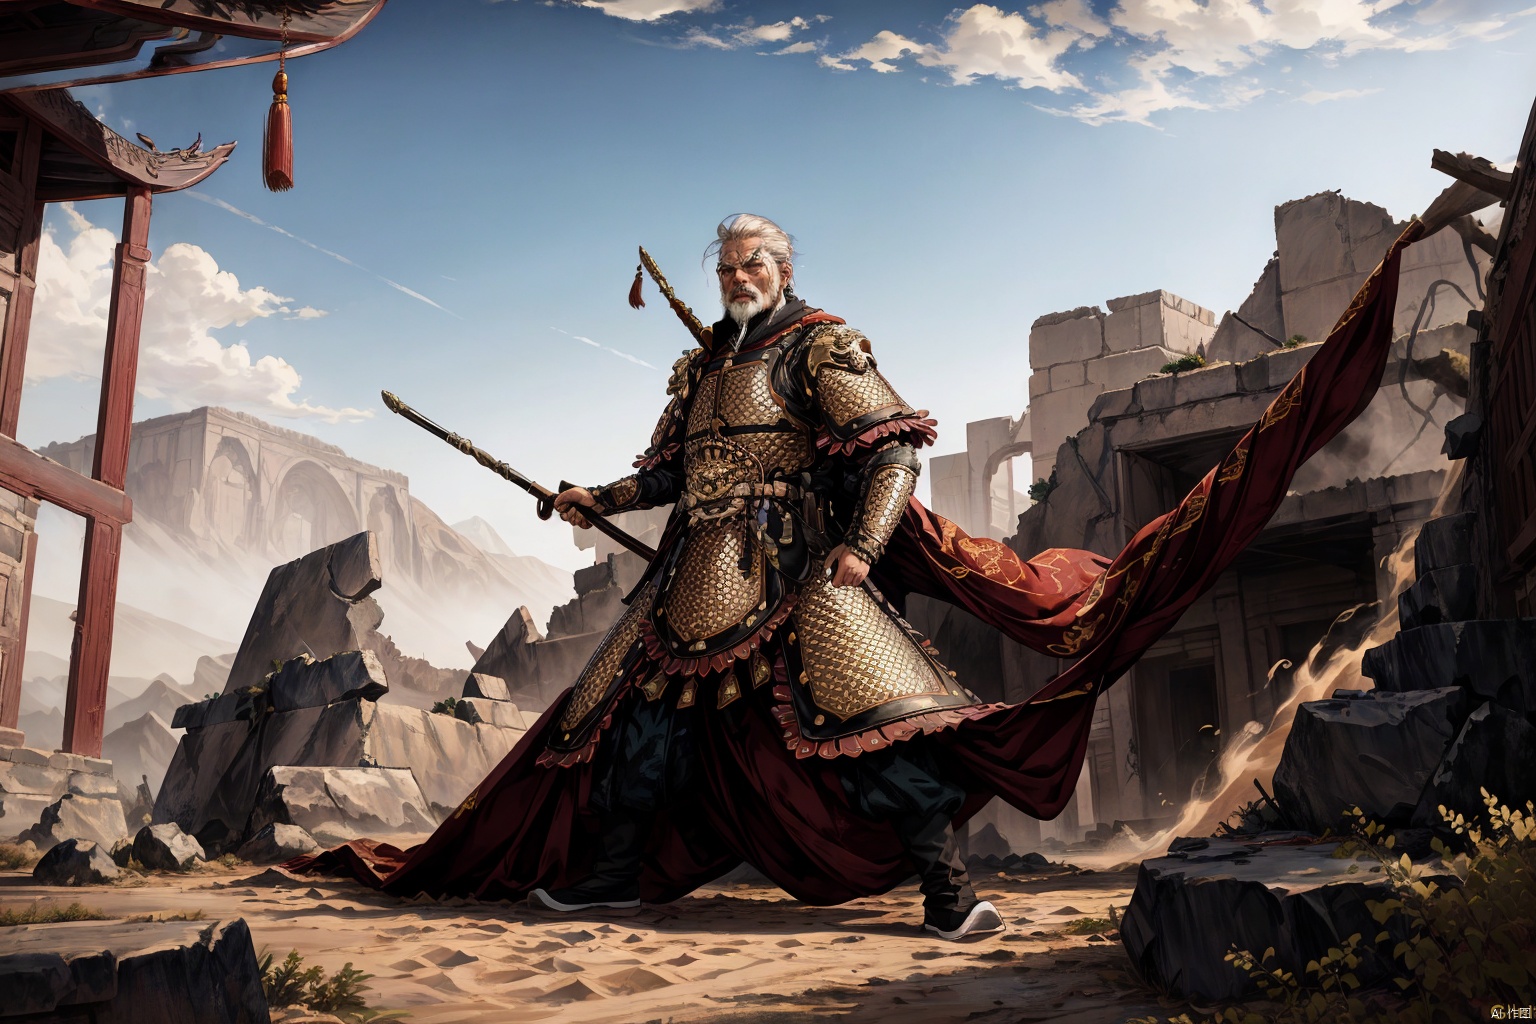 masterpiece,best quality,highly detailed,Amazing,finely detail,extremely detailed CG unity 8k wallpaper,score:>=60,, incredibly absurdres,wallpaper,realistic,real,photo,landscape,foreshortening,A man dressed in Chinese-style armor, an old general, Chinese-style armor, white cloak, wielding a guandao, a long-handled weapon, elderly, white hair, white beard, strong, rough skin, bloodstains on the armor, swinging the weapon, roaring, fighting, desert, sandstorm, chasing, fallen soldiers, bloodstains on the ground, architectural ruins, withered trees, rocks, desolate mountains